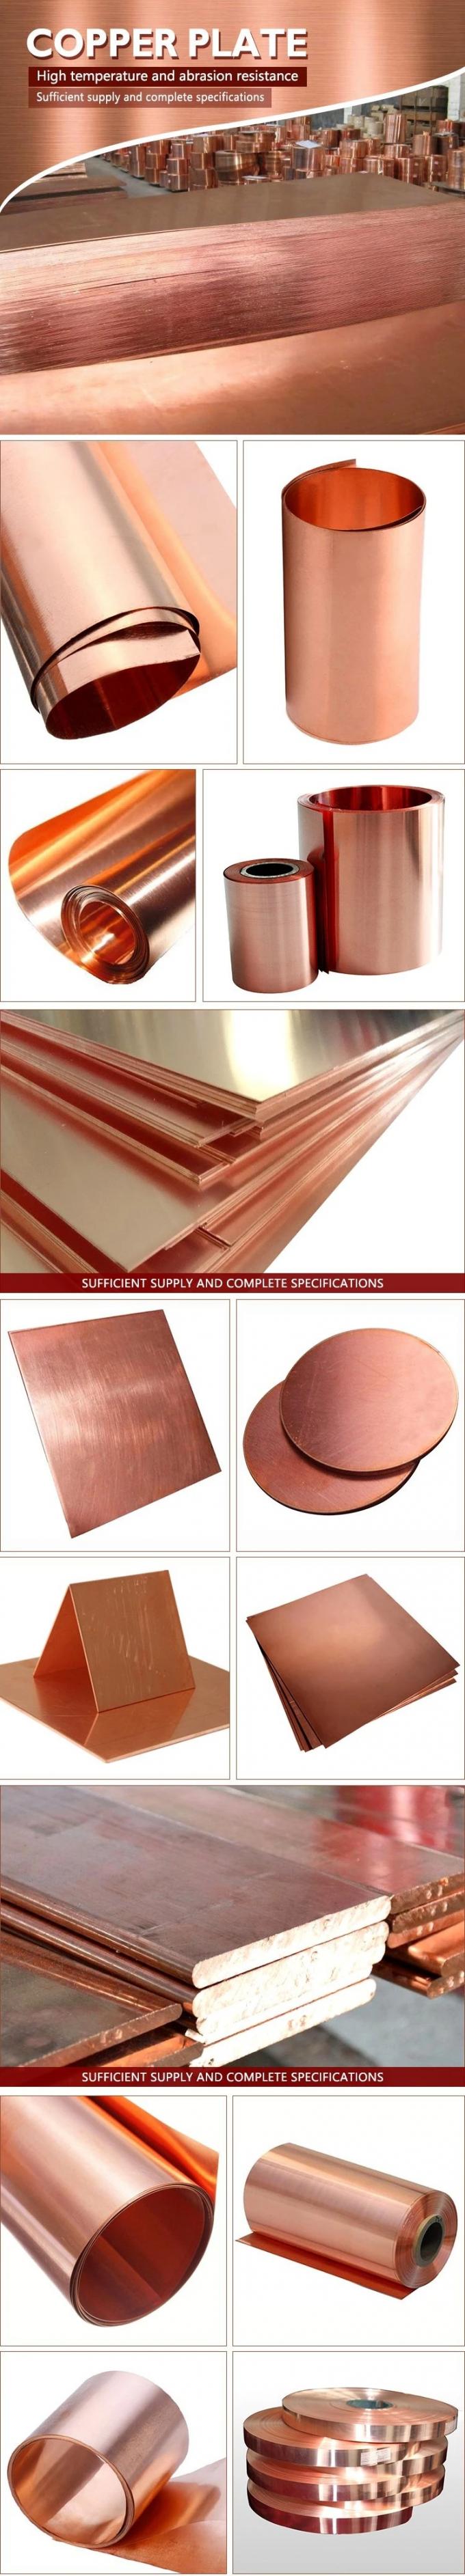 Metal Copper Foil Sheets For Stained Glass Crafts Battery Electrolytic 0.008mm 0